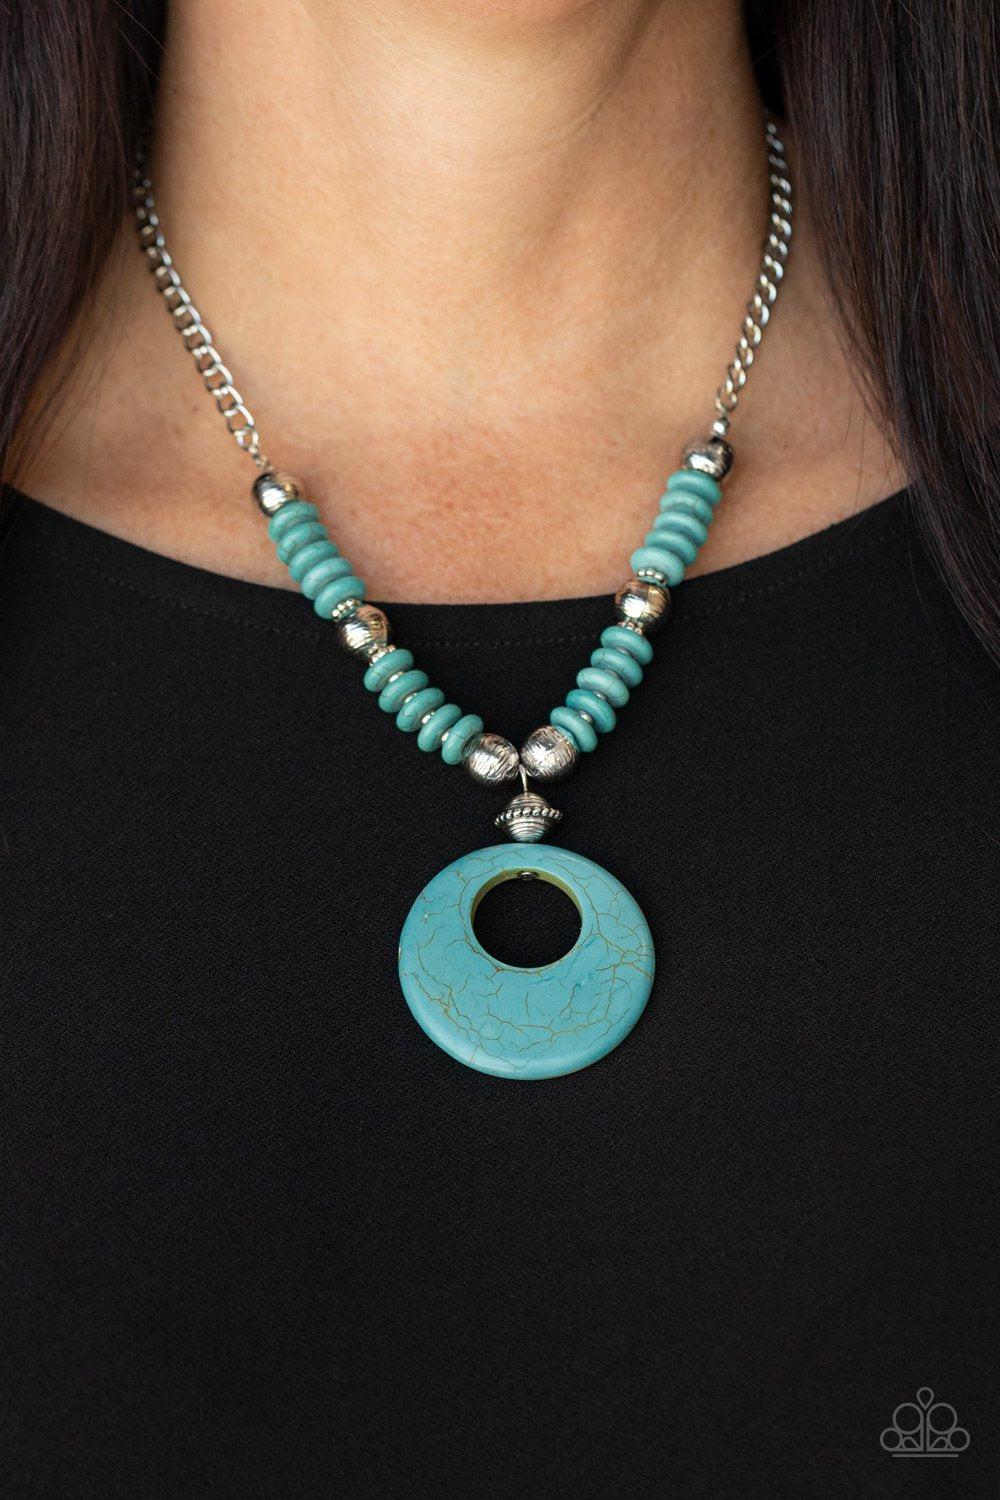 Oasis Goddess Turquoise Blue Stone and Silver Necklace - Paparazzi Accessories 2021 Convention Exclusive- lightbox - CarasShop.com - $5 Jewelry by Cara Jewels